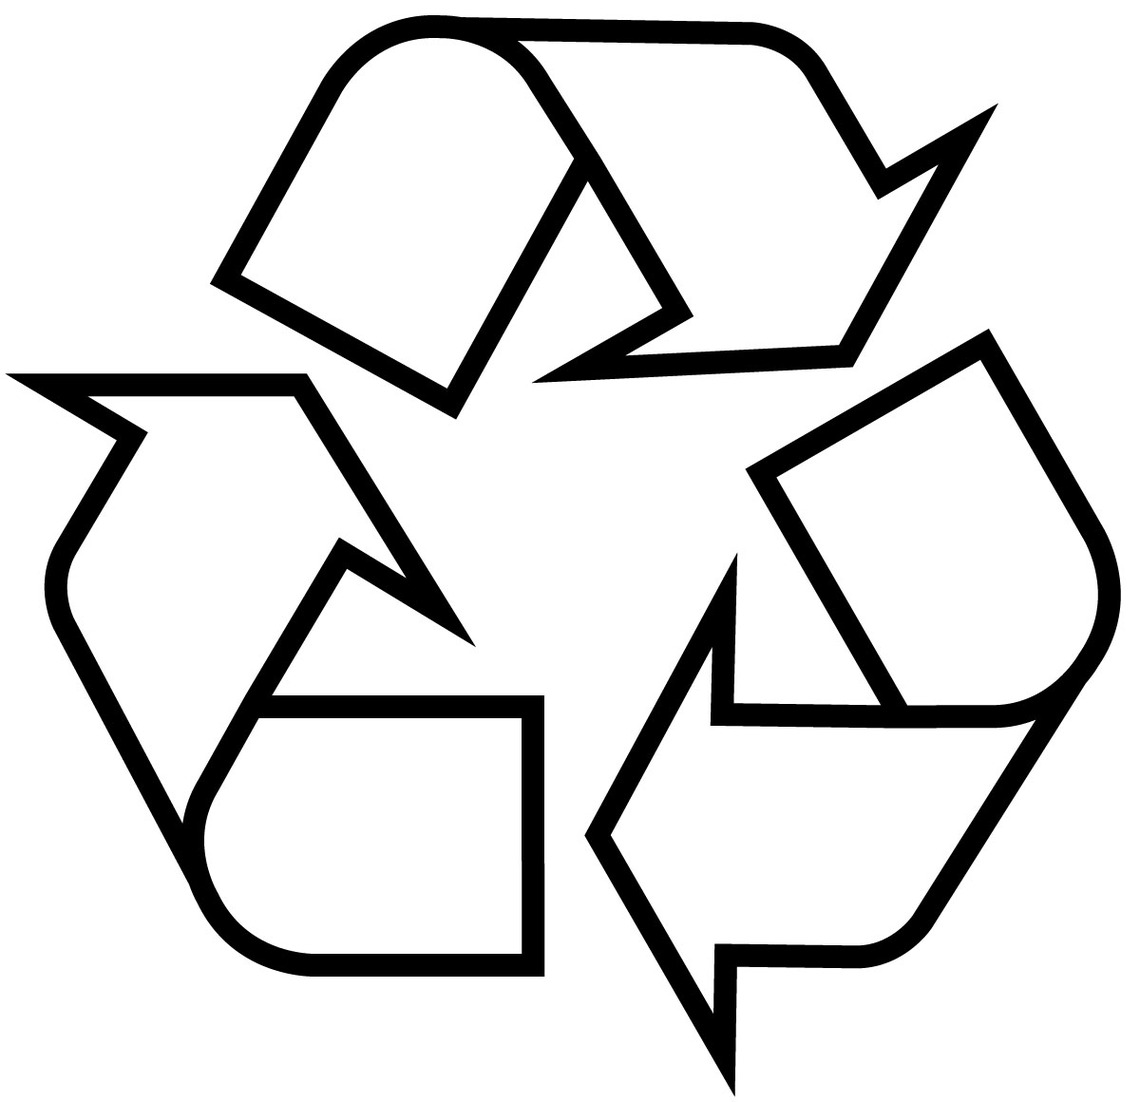 White Recycle Symbol Clipart - Free to use Clip Art Resource